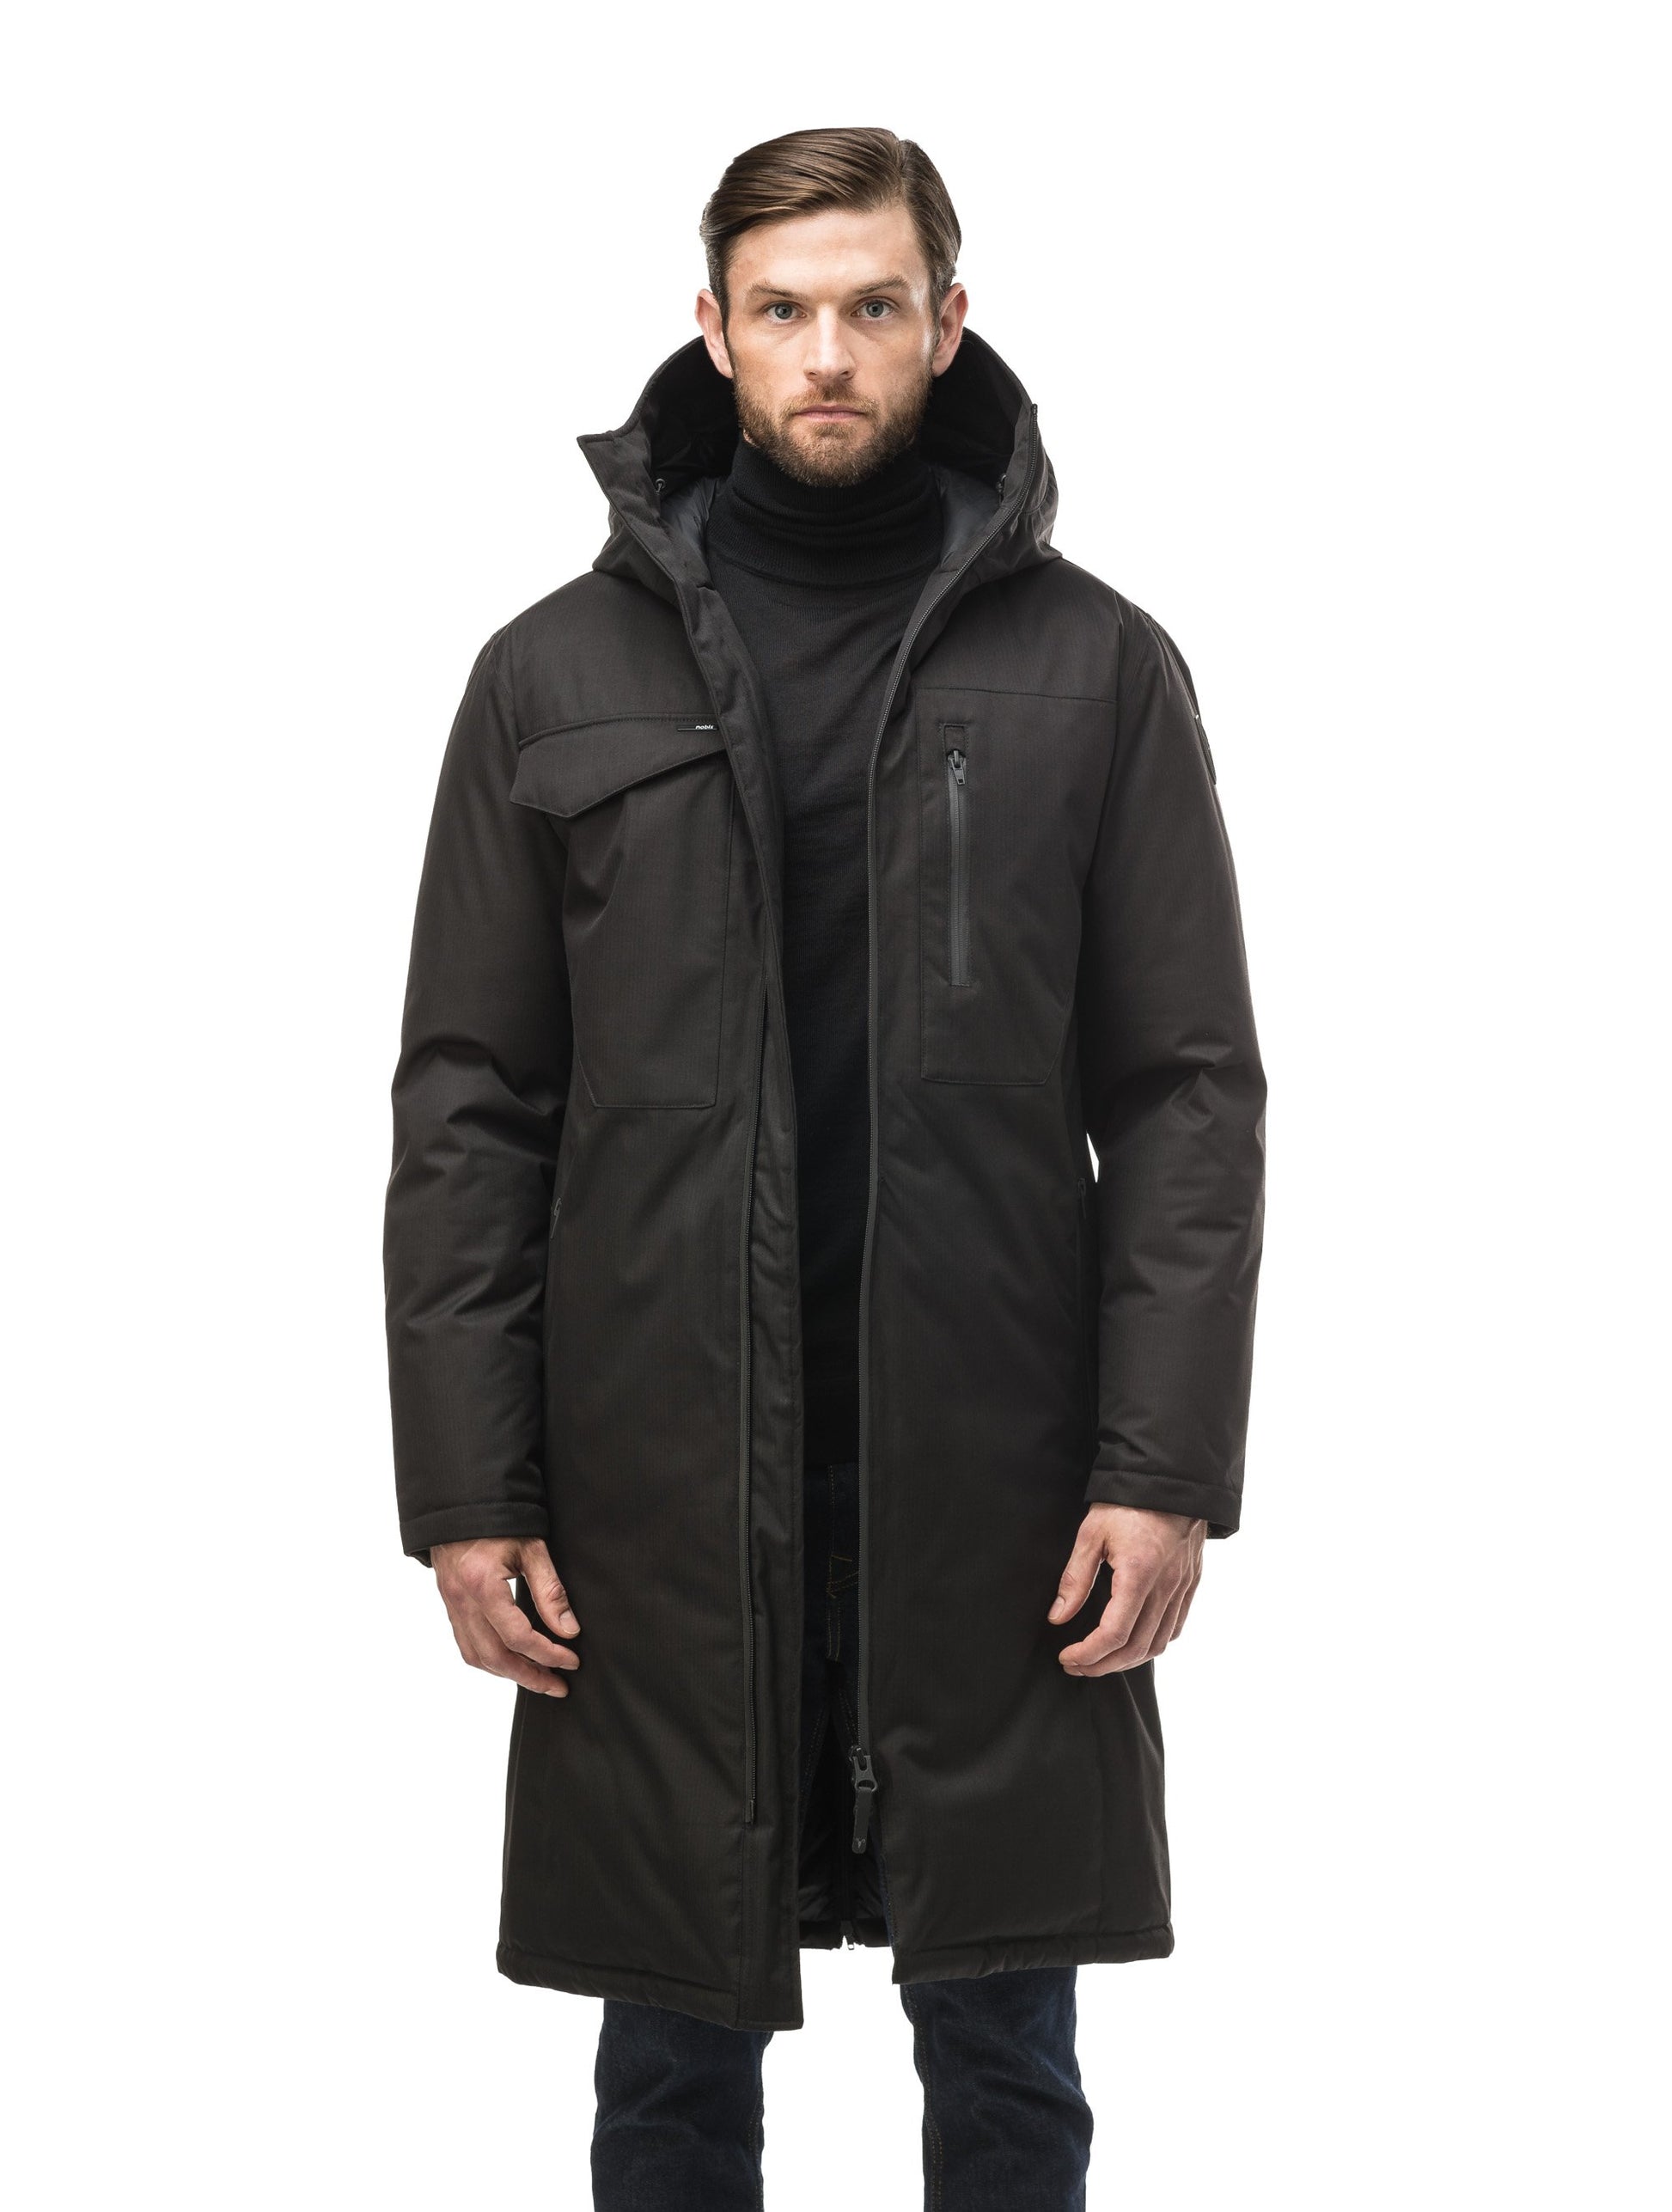 Long men's calf length parka with down fill and exposed zipper that features spacious pockets and zippered vents in Black